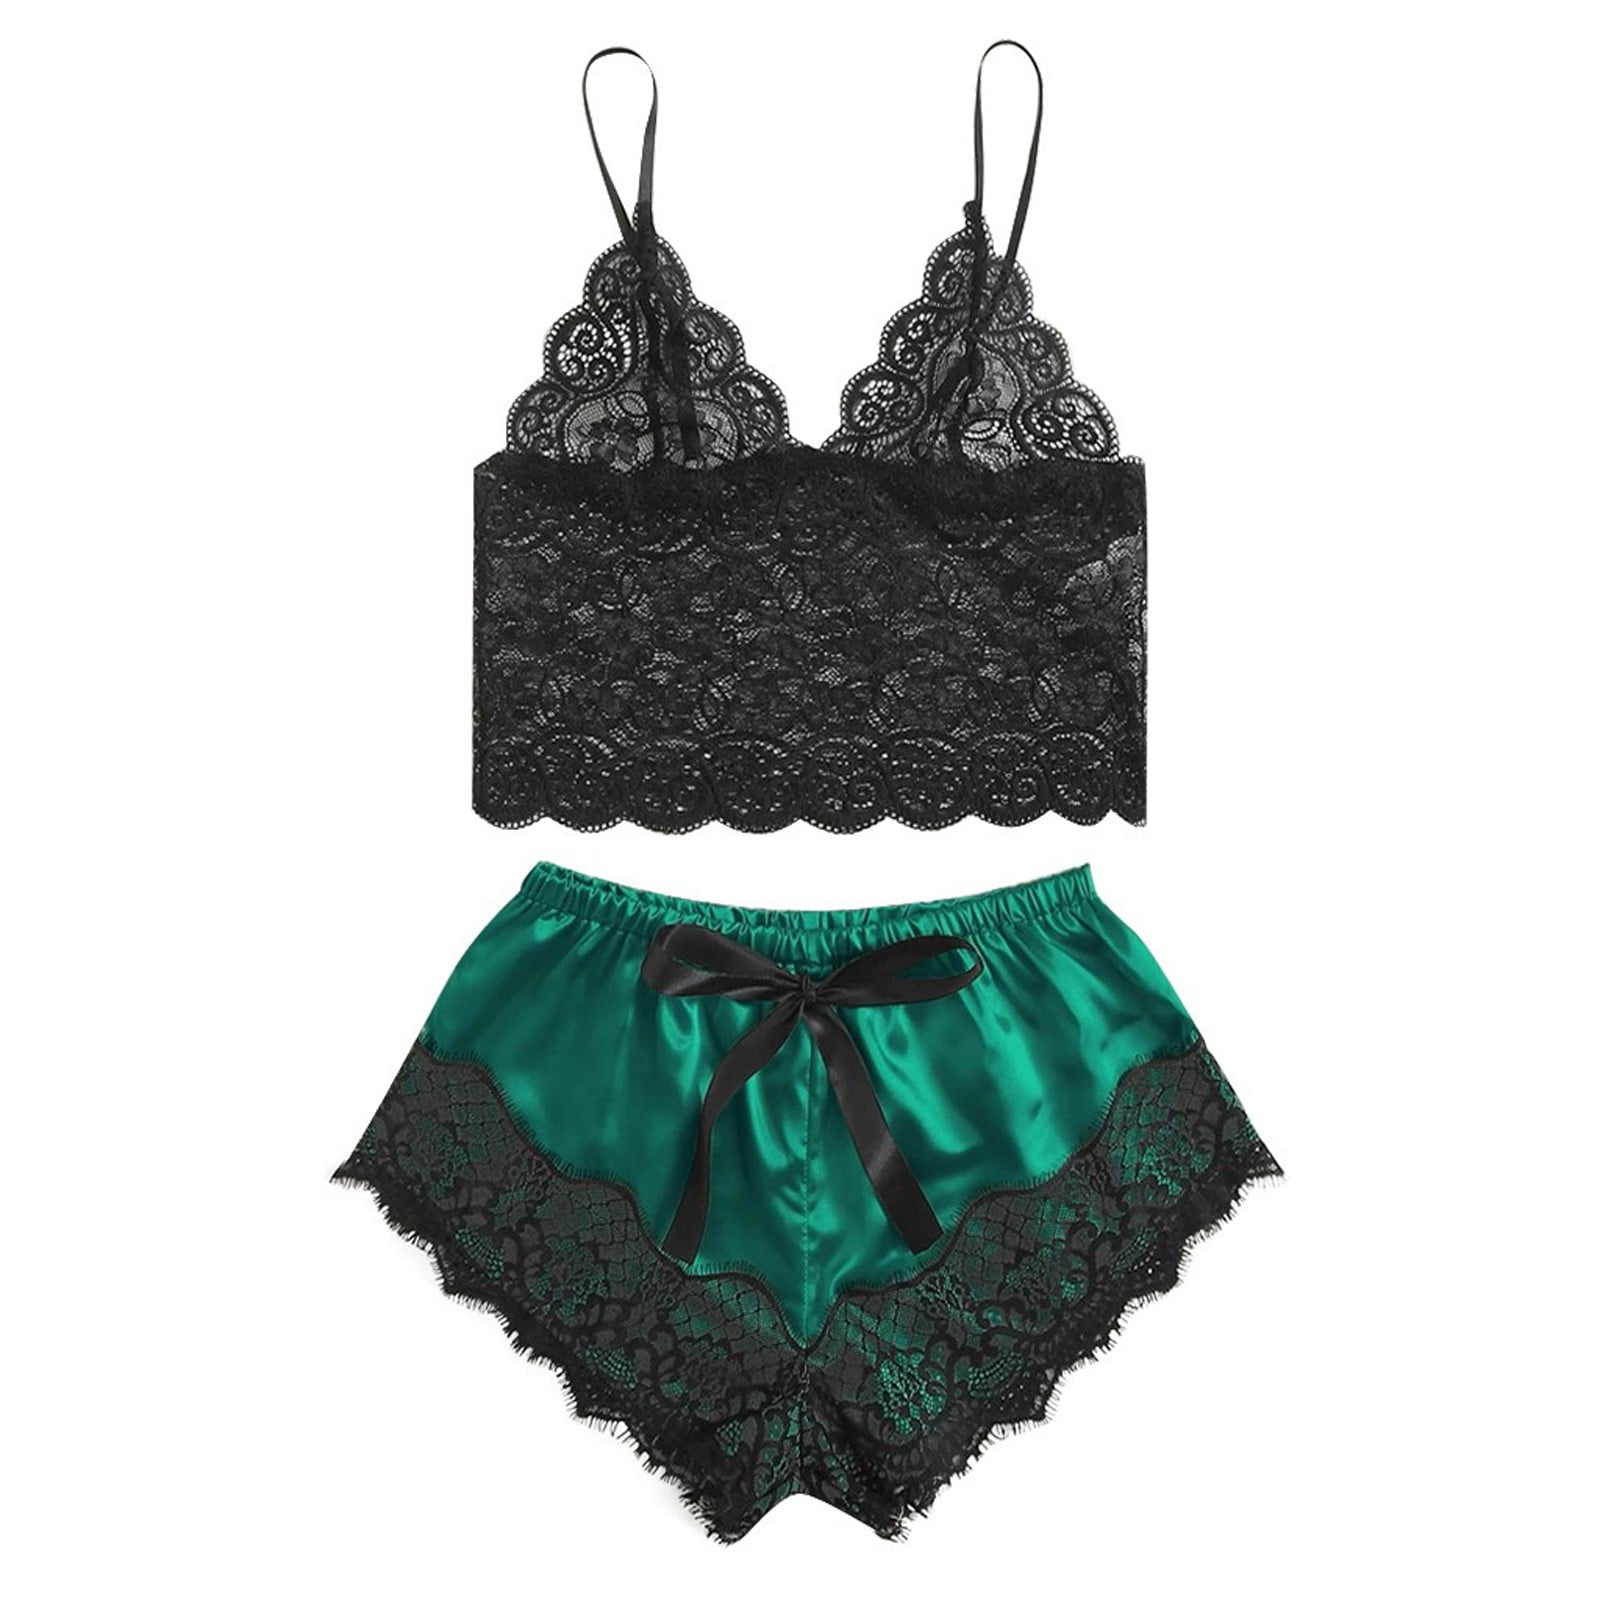 Shein- Contrast Lace Cami Top With Floral Satin Shorts Lingerie